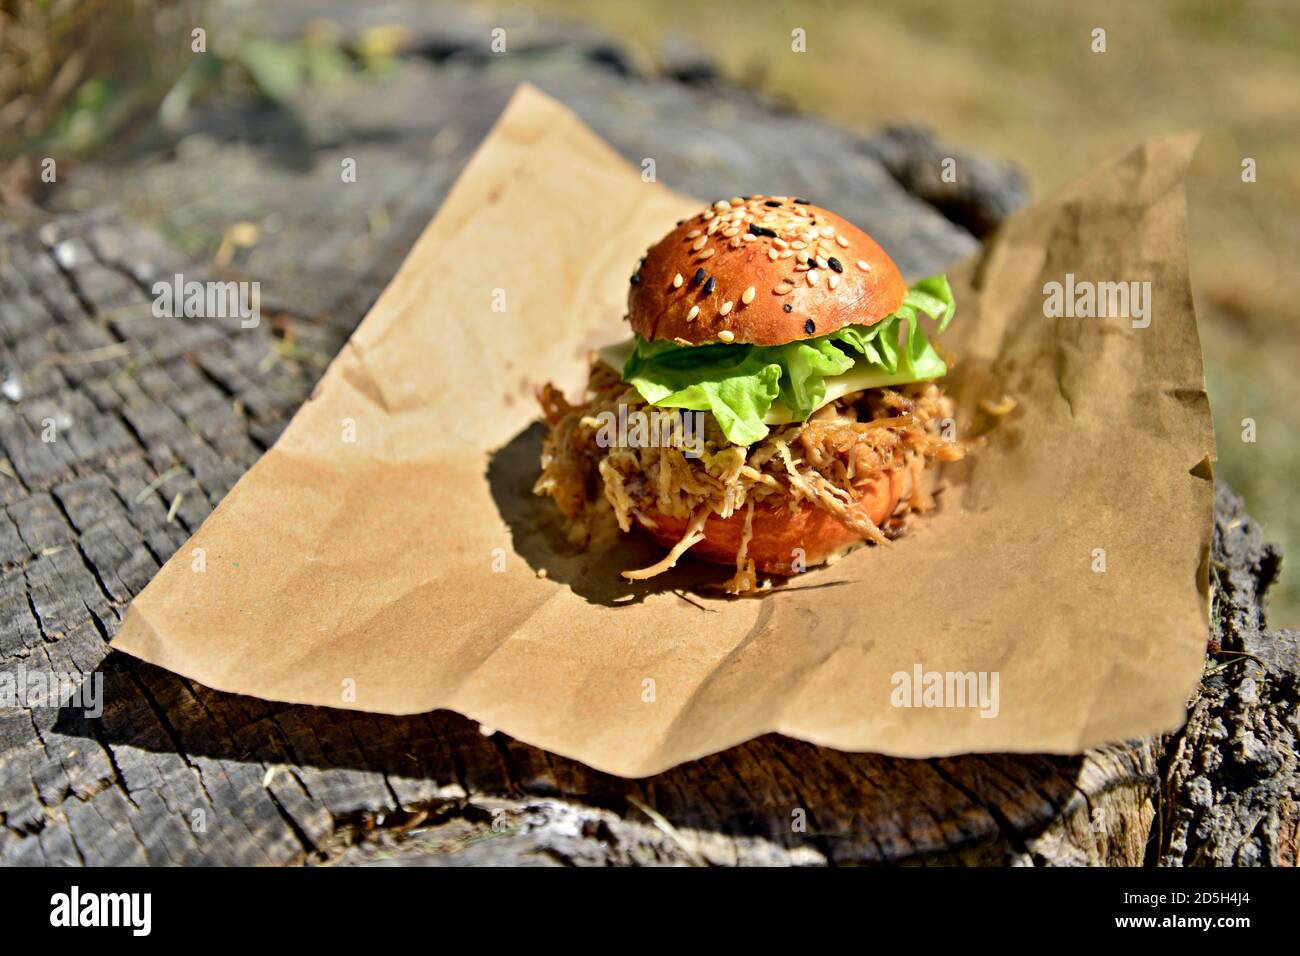 Cheese burger with shredded meat and fresh salad. On a stump in the forest. Stock Photo